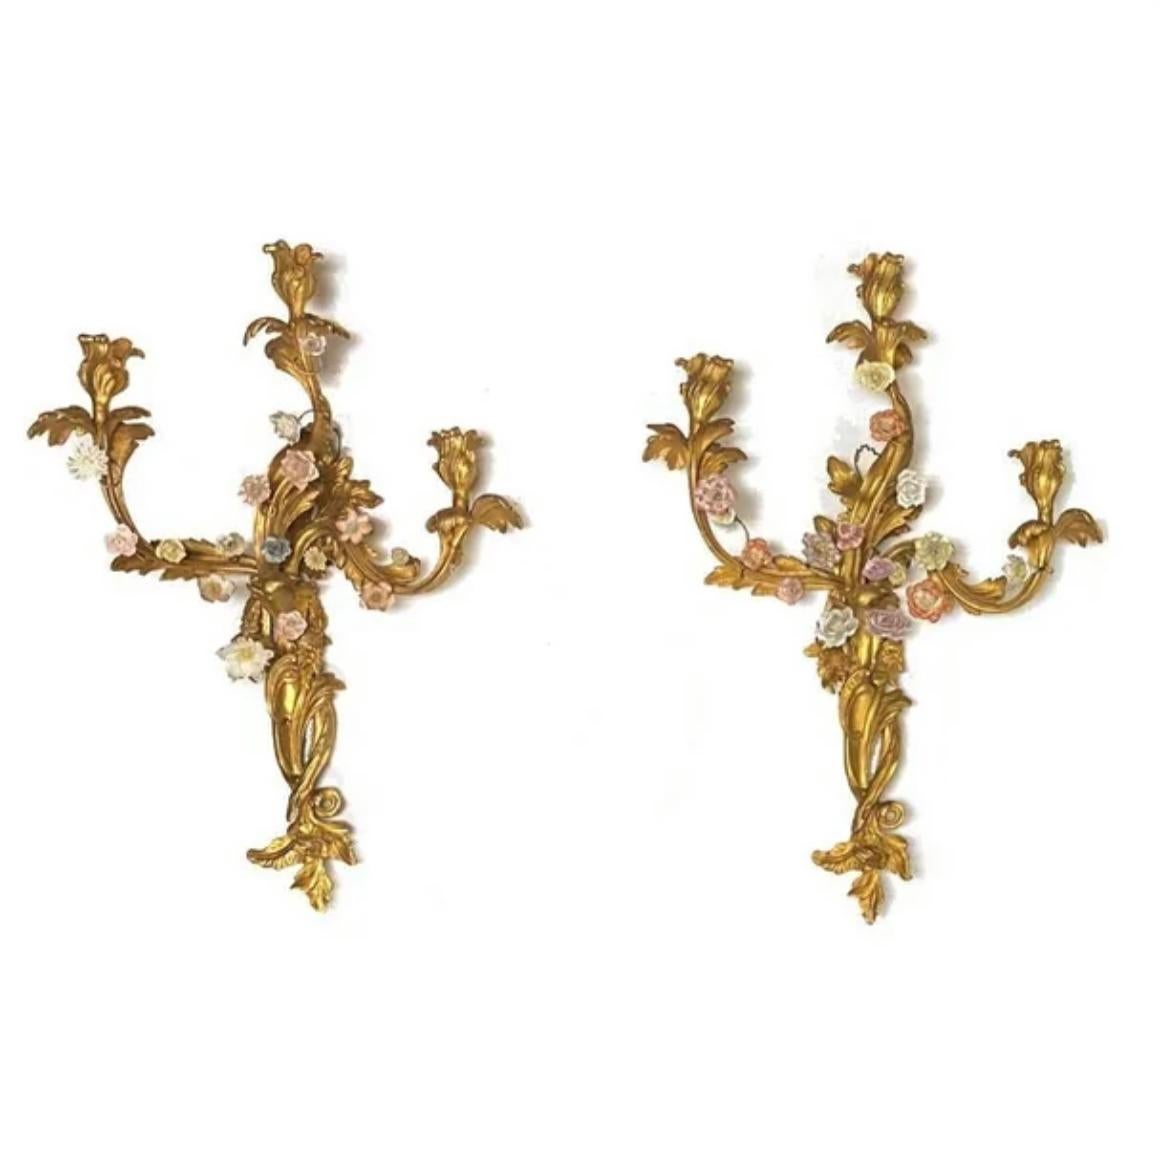 Set of four (4) French gilt bronze two-light wall appliques in the Rococo style with numerous multi-colored porcelain flower heads. May be electrified.